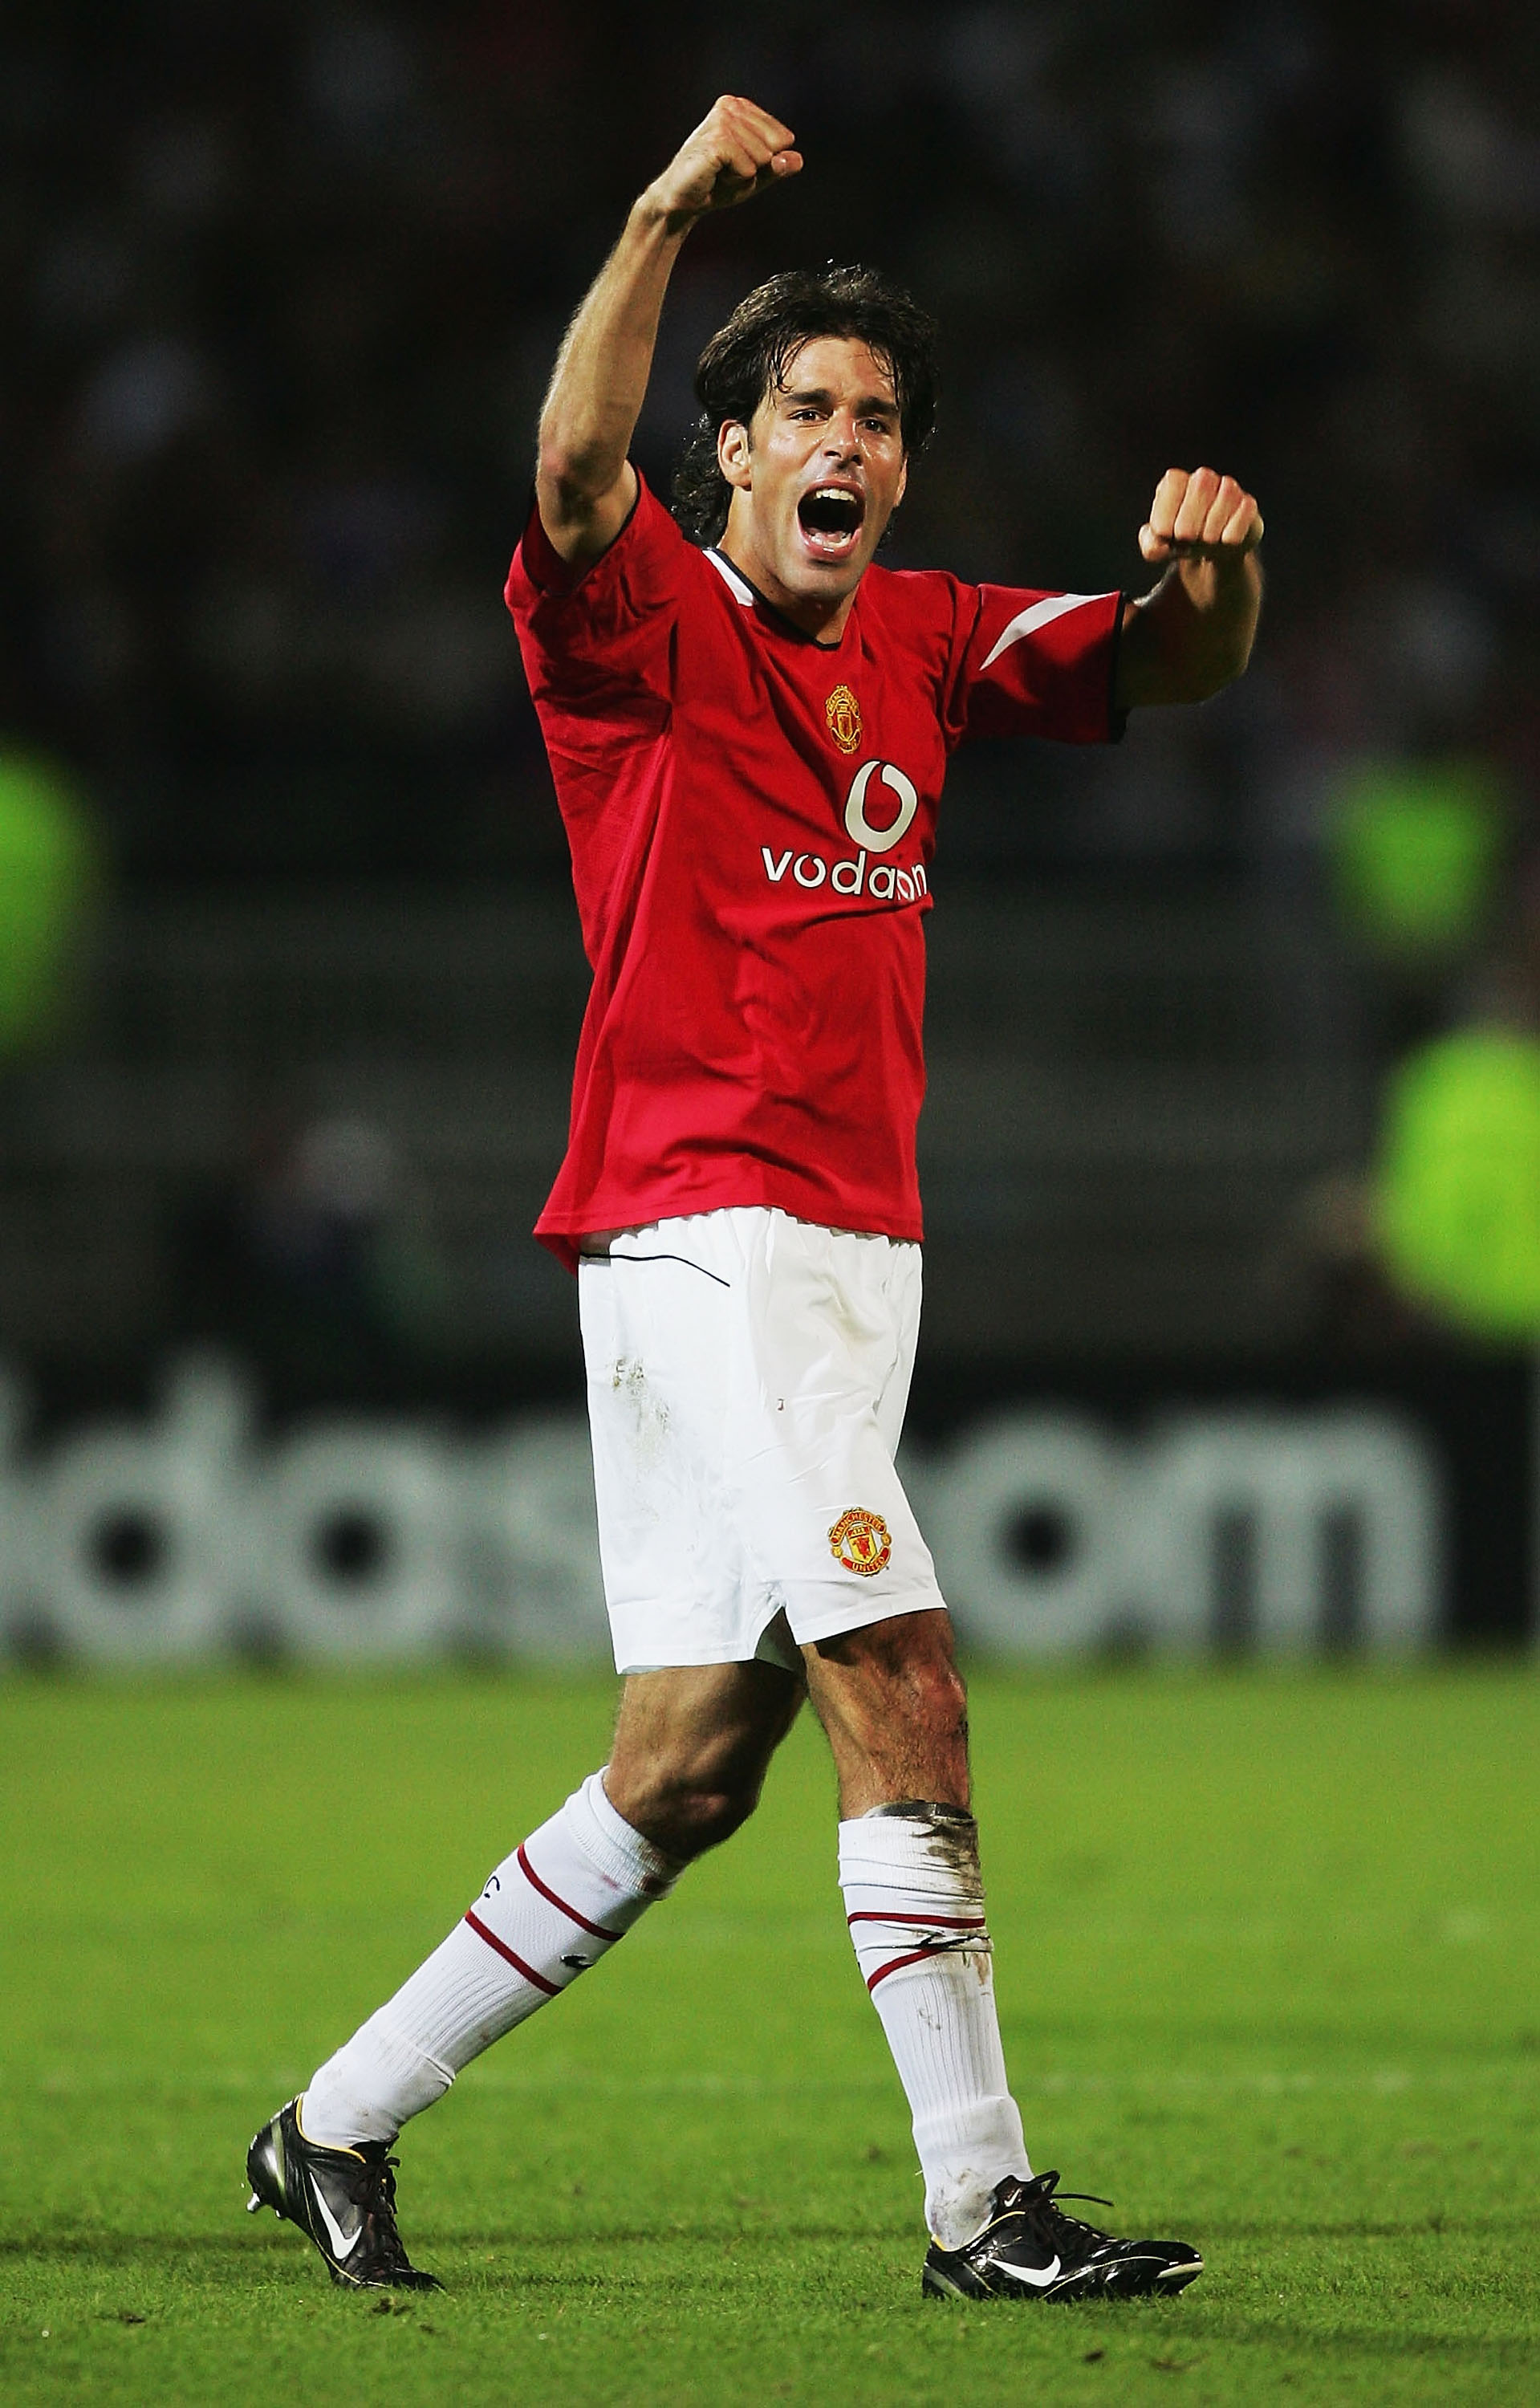 LYON, FRANCE - SEPTEMBER 15:  Ruud van Nistelrooy of Manchester United celebrates scoring their first goal during the UEFA Champions League Group D match between Olympique Lyonnais and Manchester United at the Municipal de Garland Stadium on September 15,